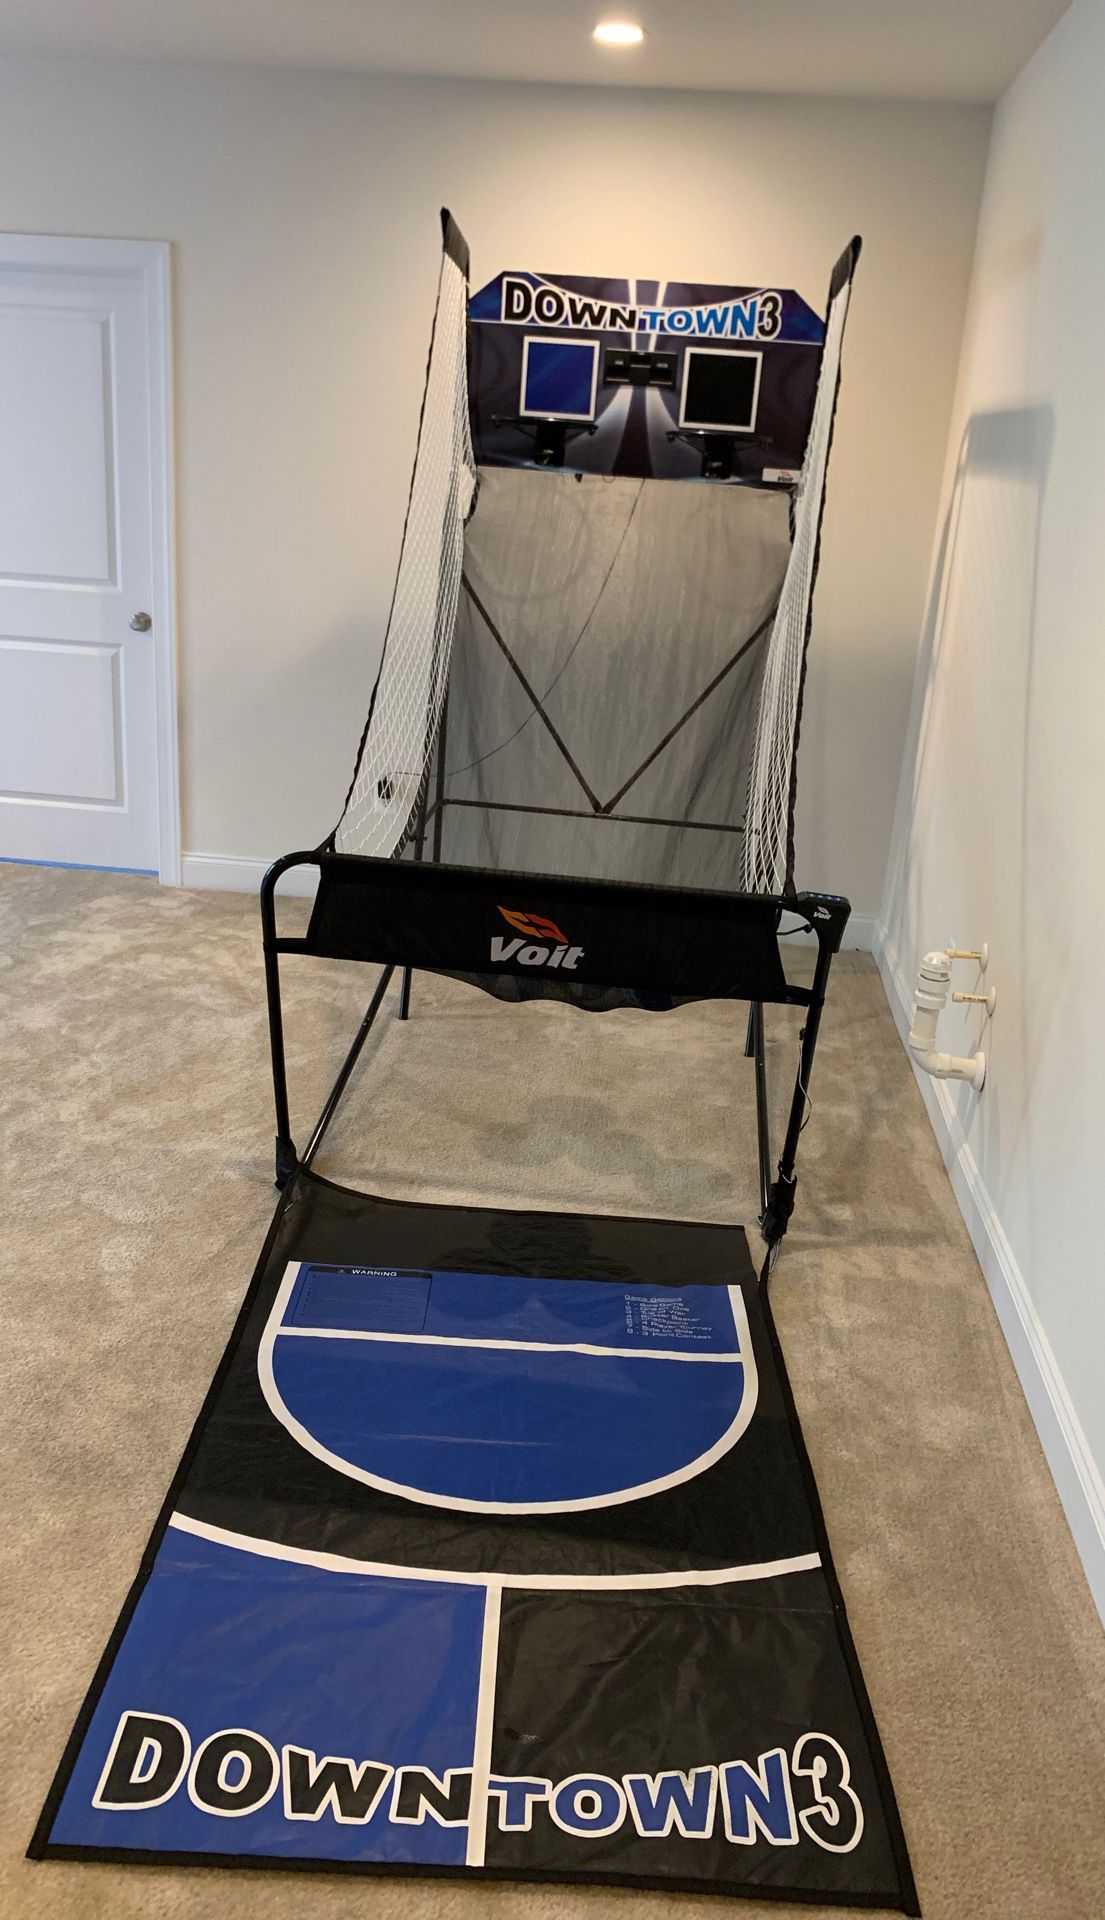 Visit Downtown 3 Indoor Basketball Arcade. Must sell to the highest bidder. Current bid $30.00 bid increment $5.00. Auction ends october 31st 2019